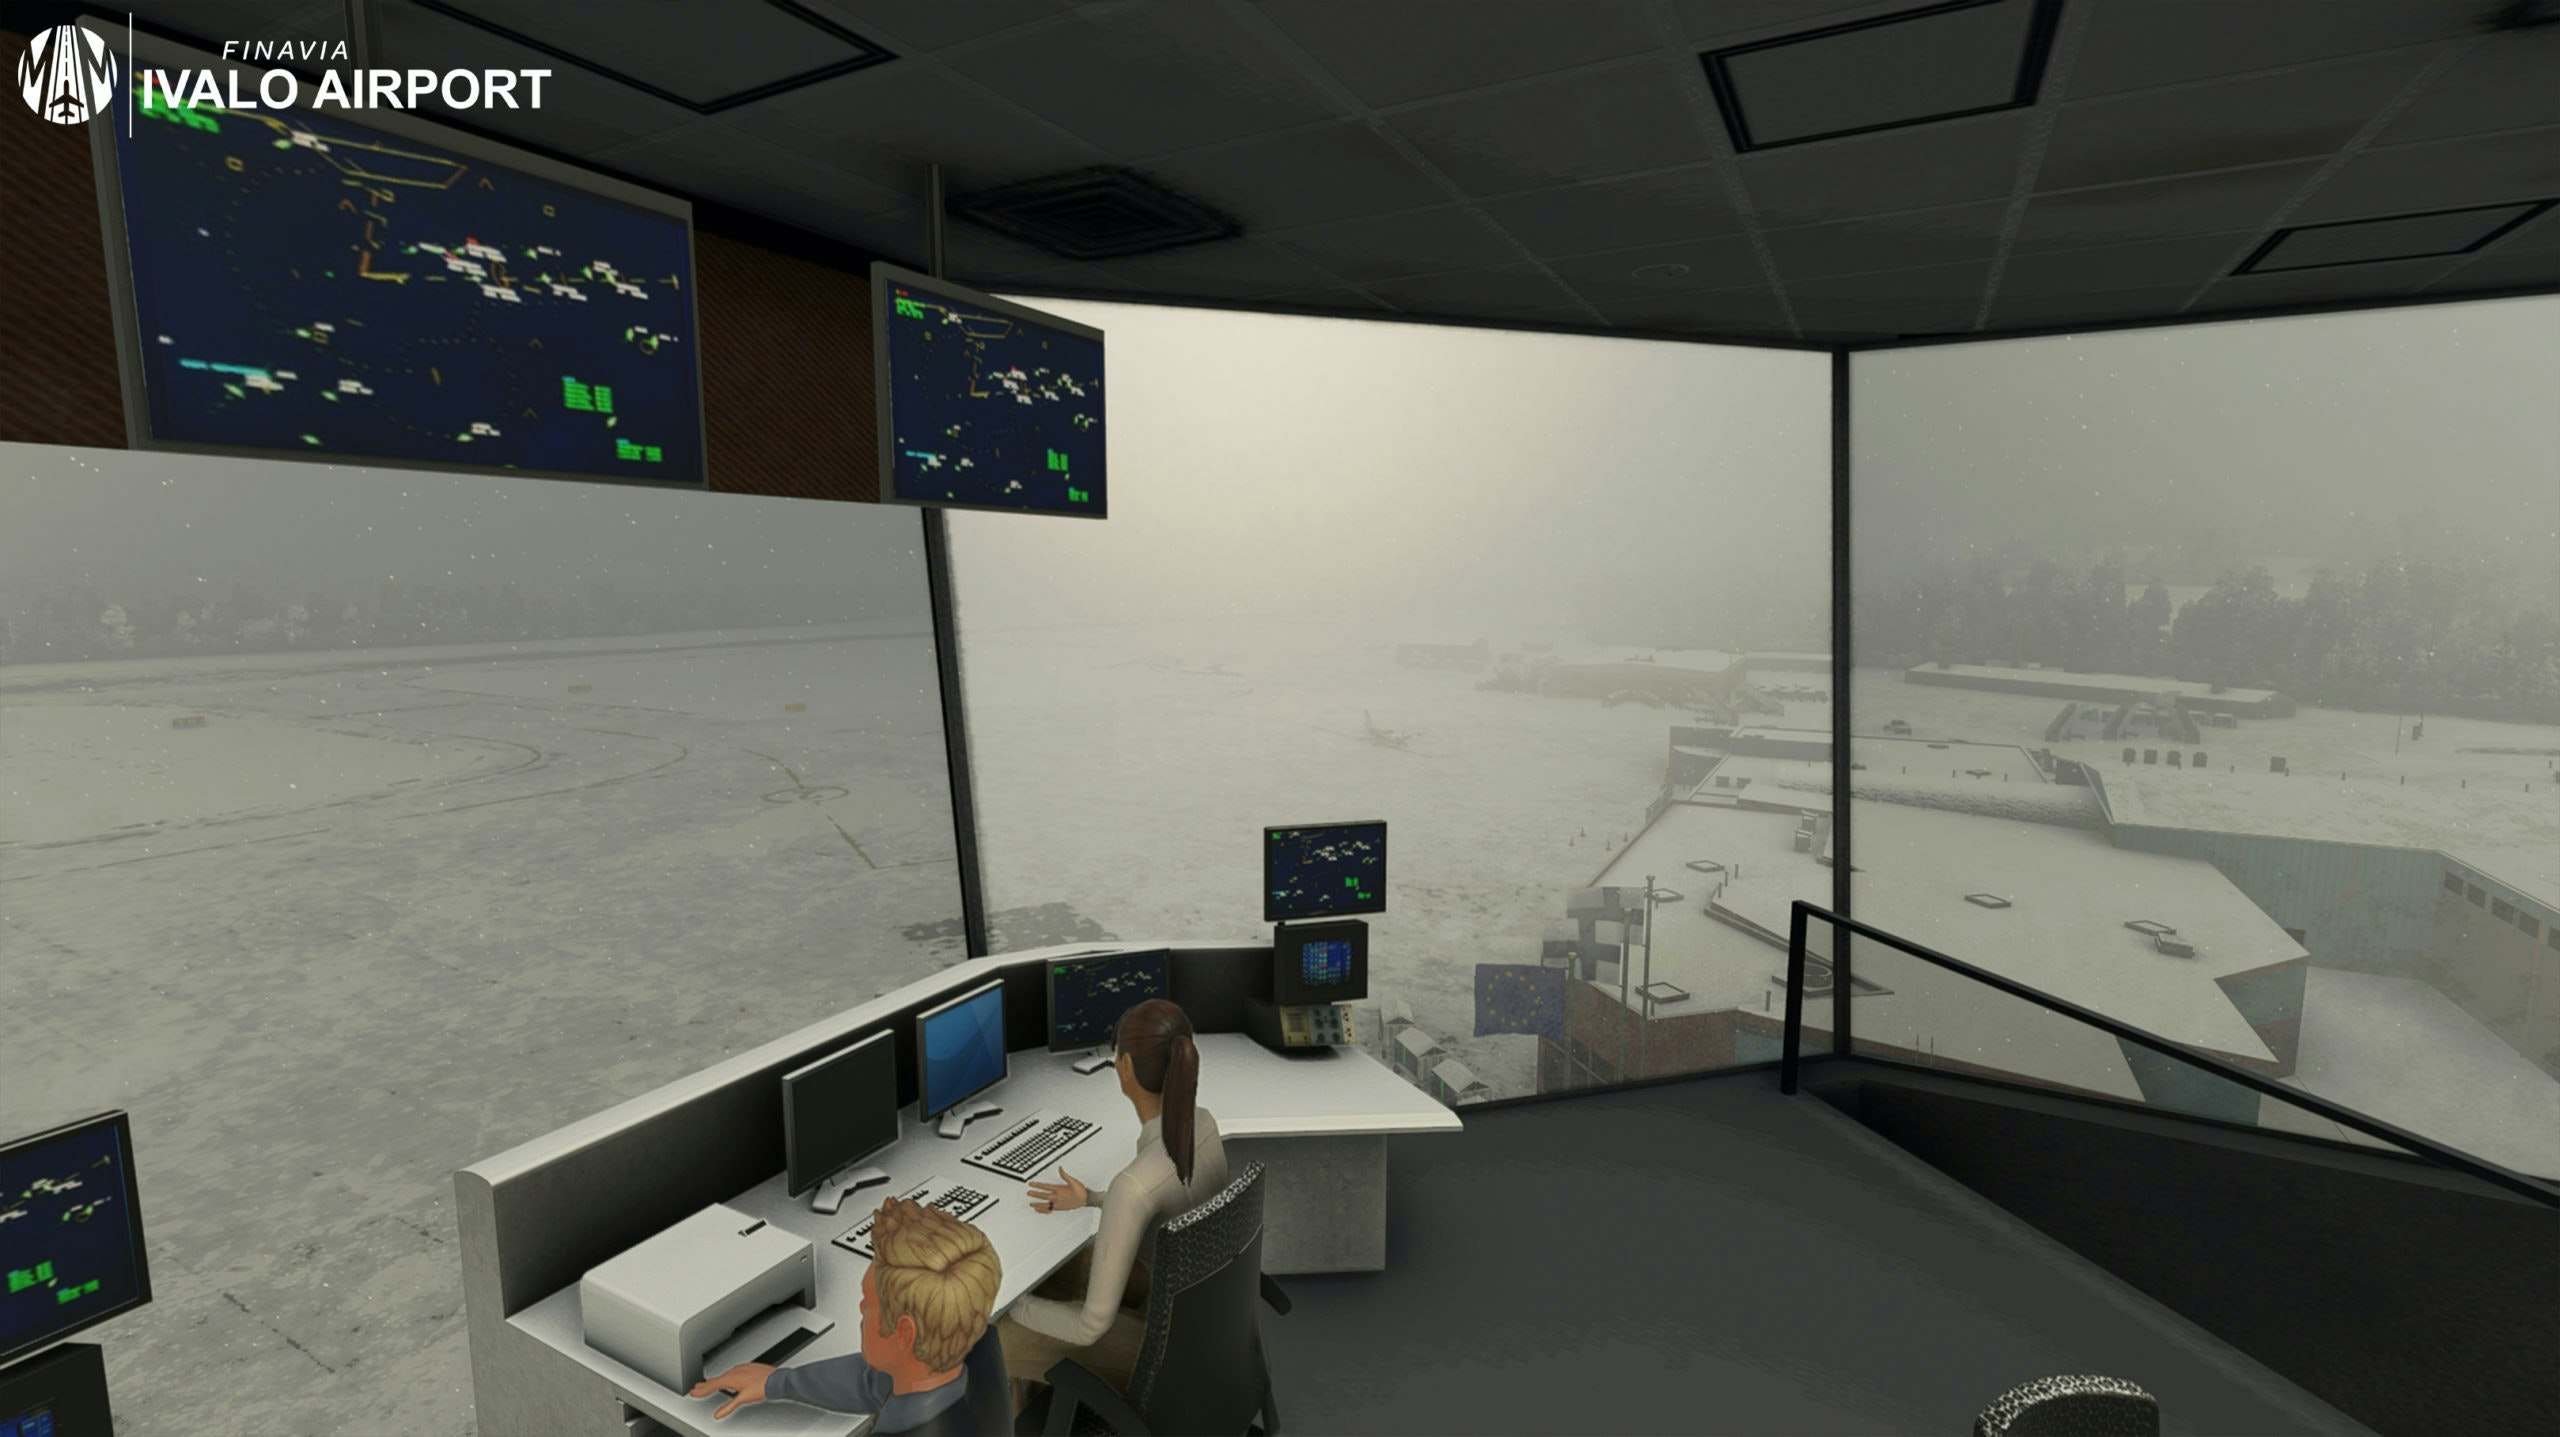 M'M Simulations Releases Ivalo Airport